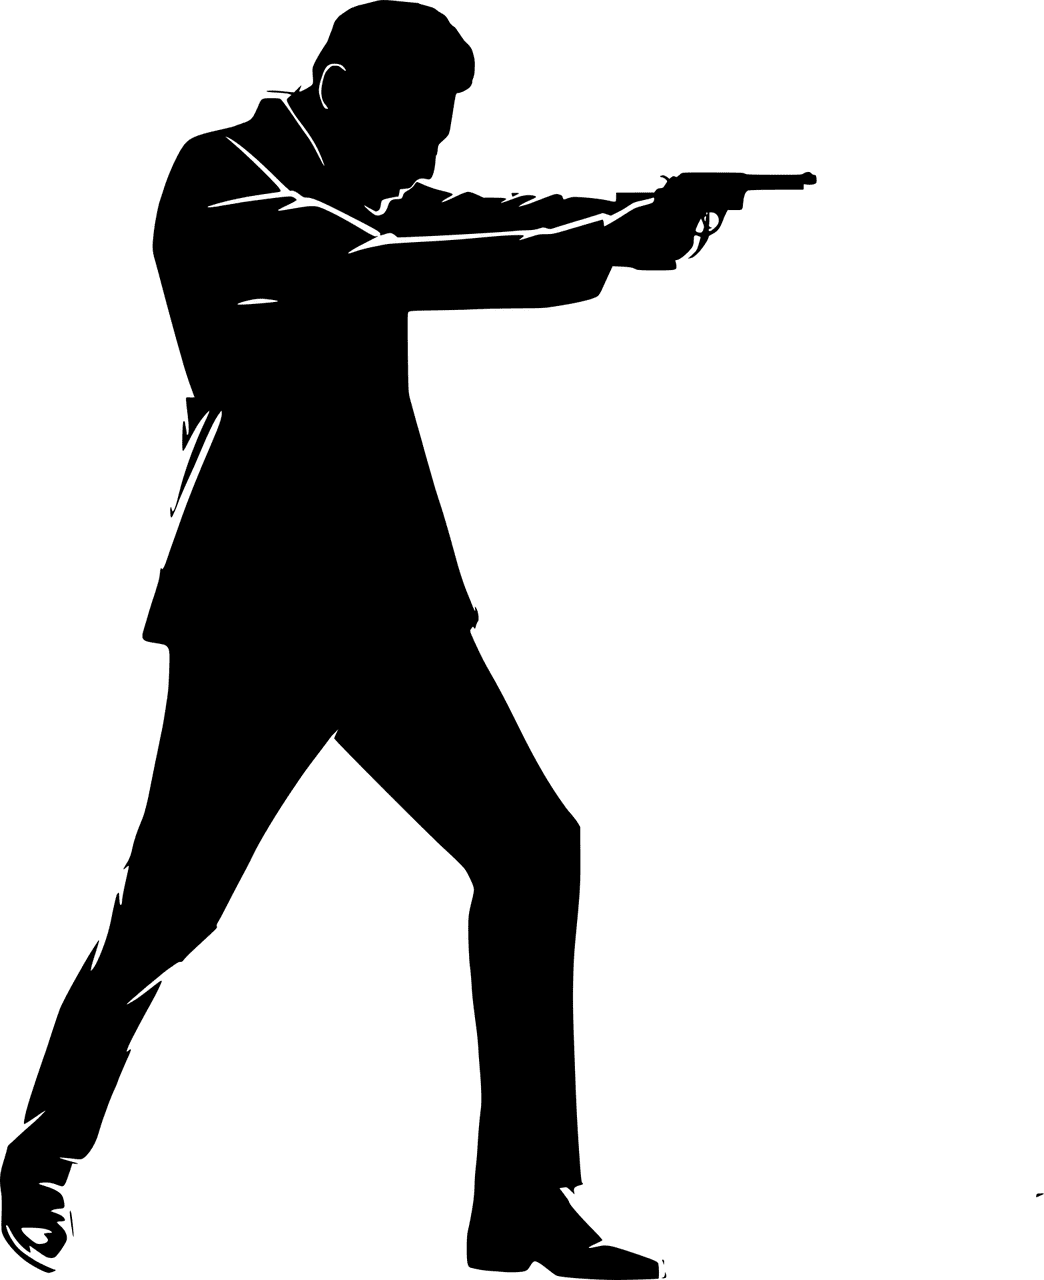 A silhouette of a man pointing a gun. | Source: Pixabay 